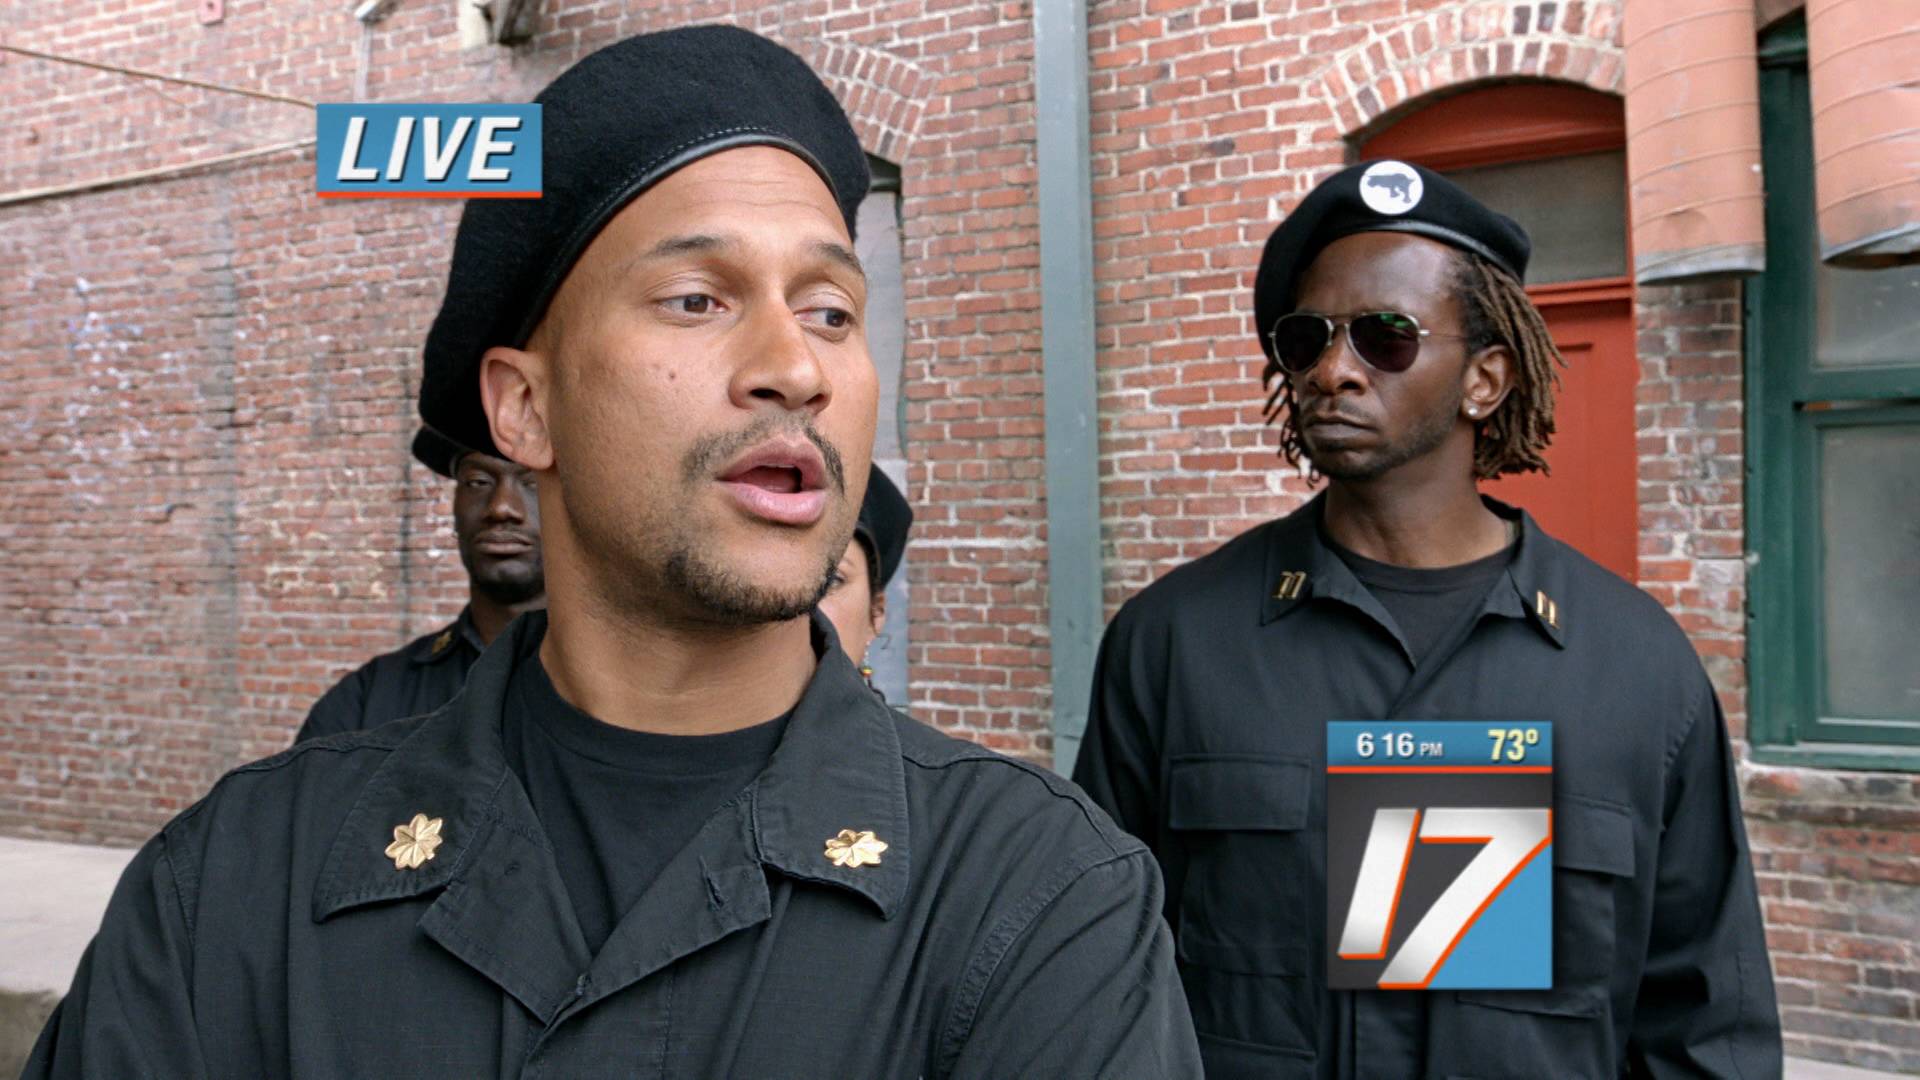 The New Black Panther Party - Key & Peele (Video Clip) | Comedy Central US